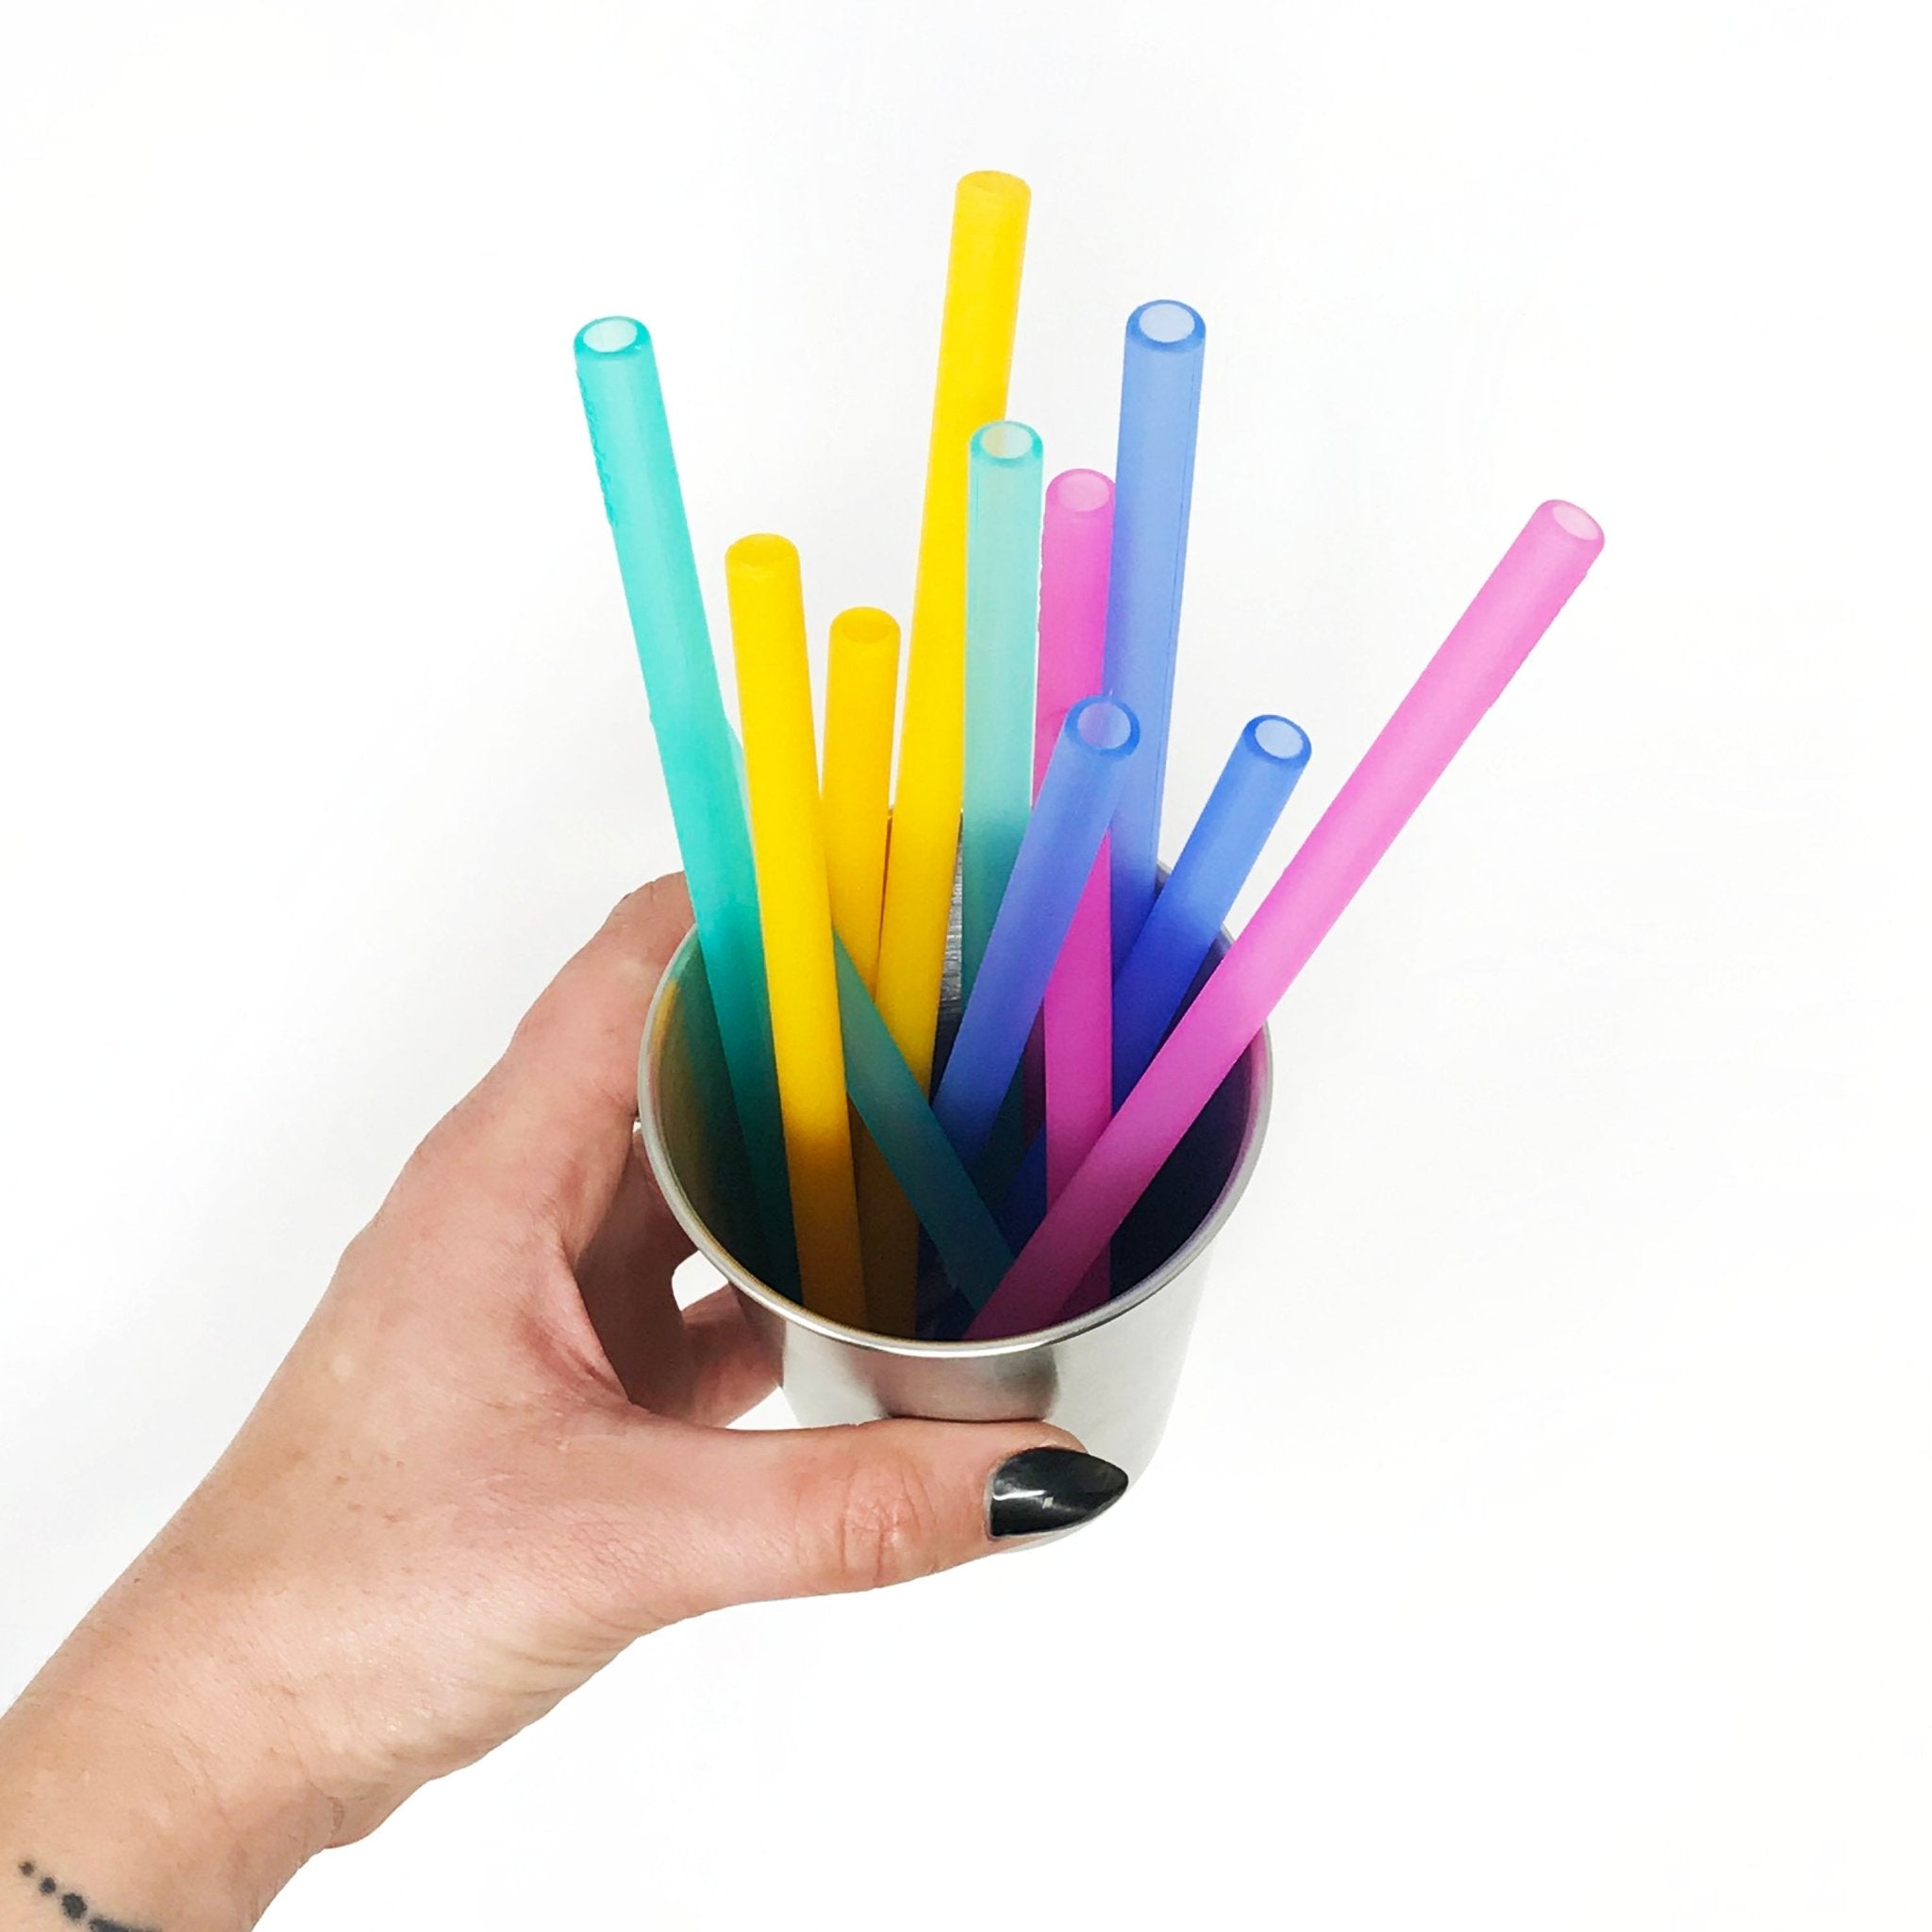 Build-A-Straw Reusable Silicone Straws: Extra Wide Size